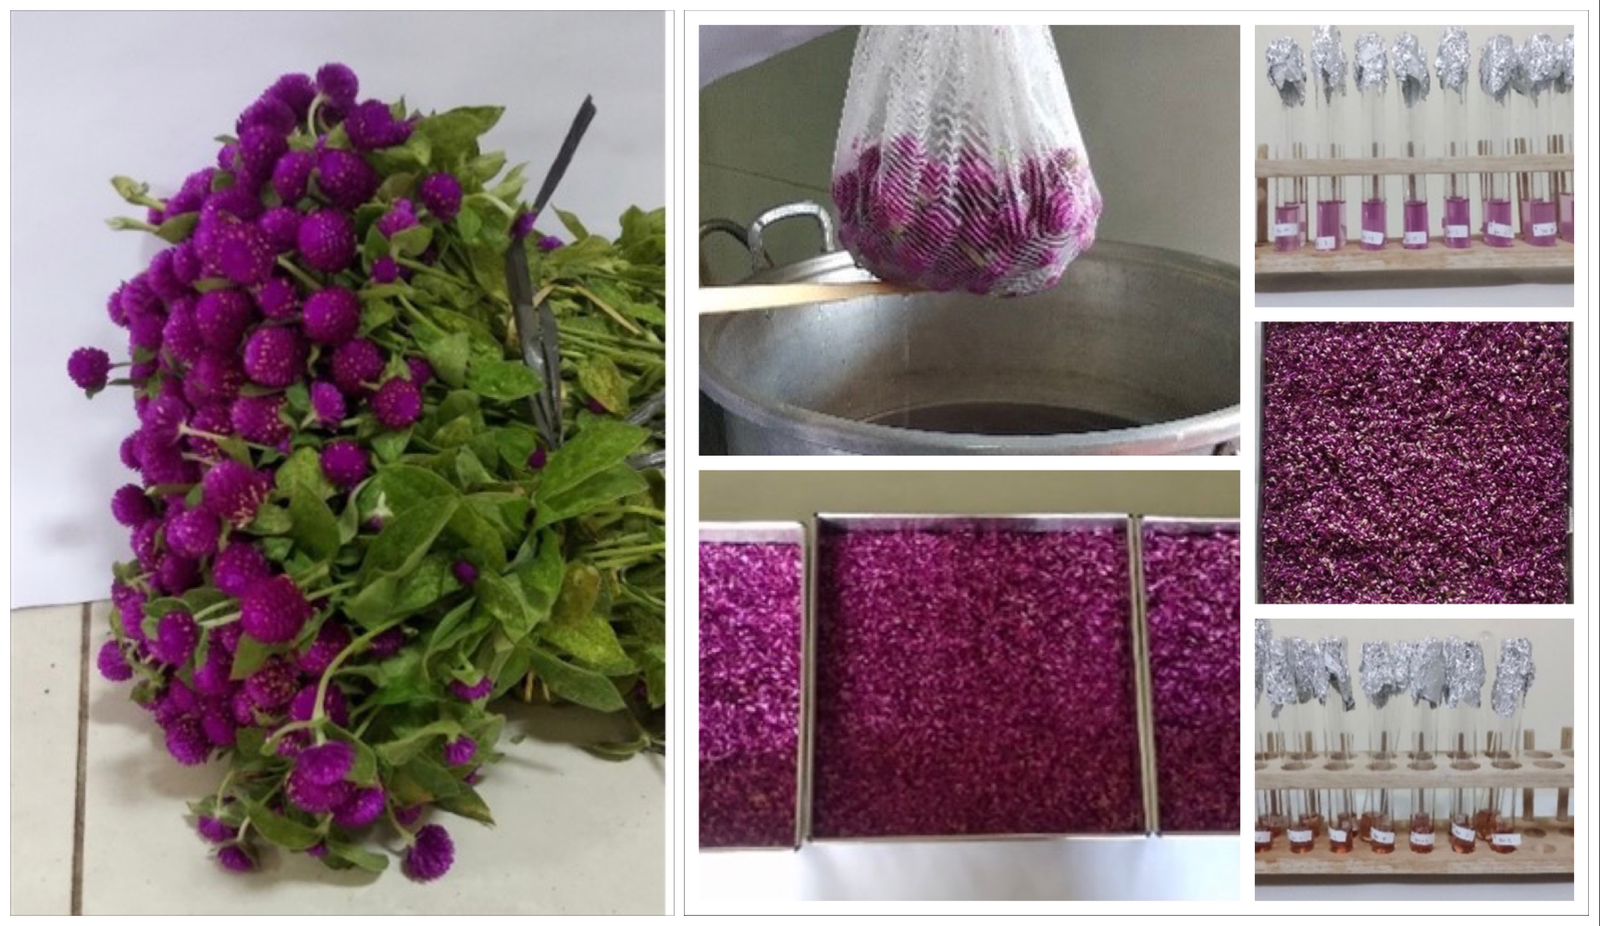 Successfully Obtaining a Bachelor Degree in Agricultural Technology, Evita Uses Hot Water Blanching Technique To Get The Best Color To Produce Knob Flower Powder